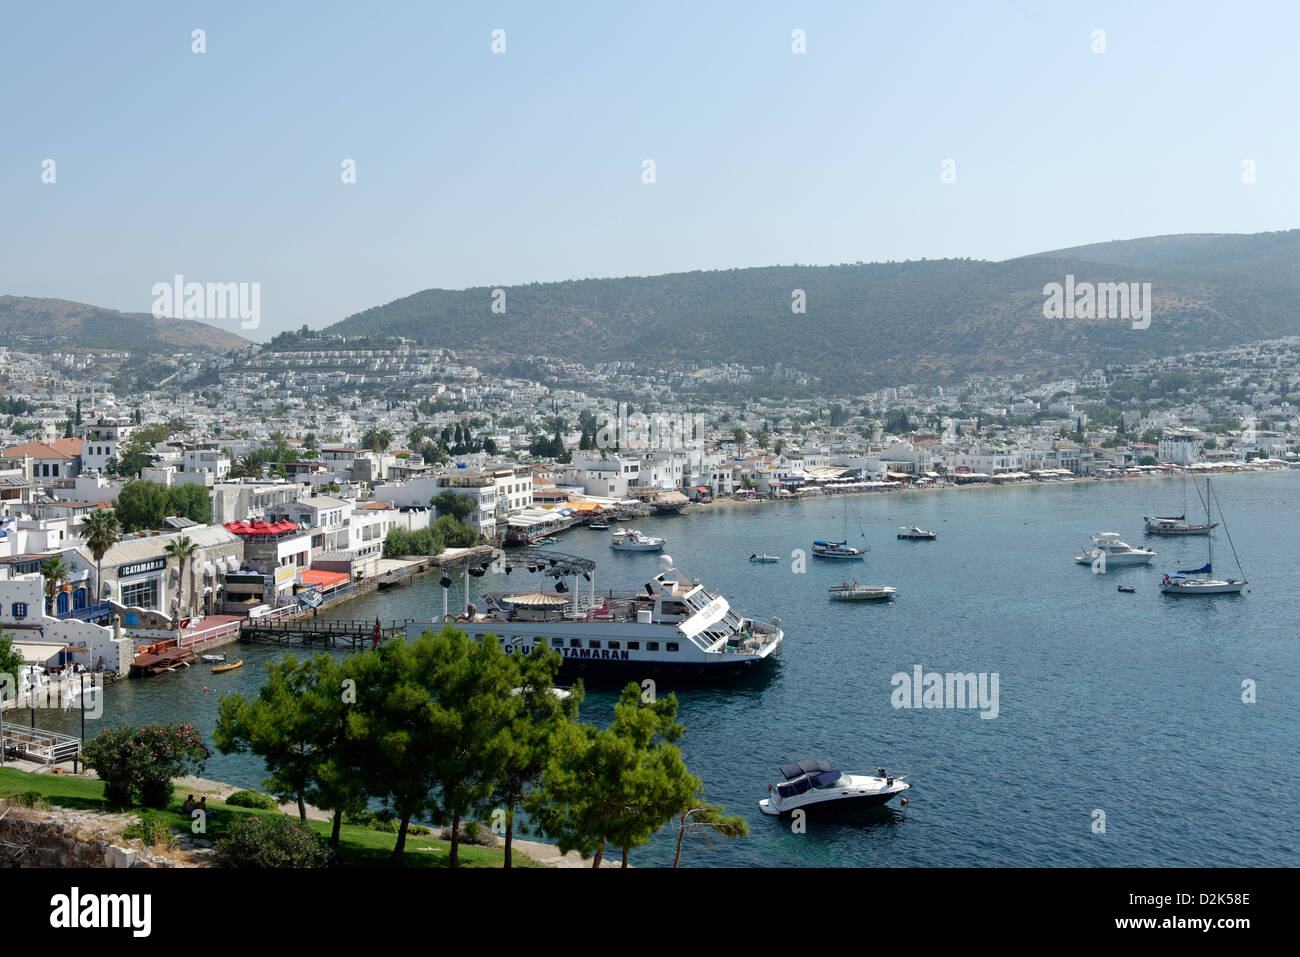 Bodrum Turkey. The cosmopolitan, vibrant and historical city of Bodrum, known in antiquity as Halicarnassus. Stock Photo